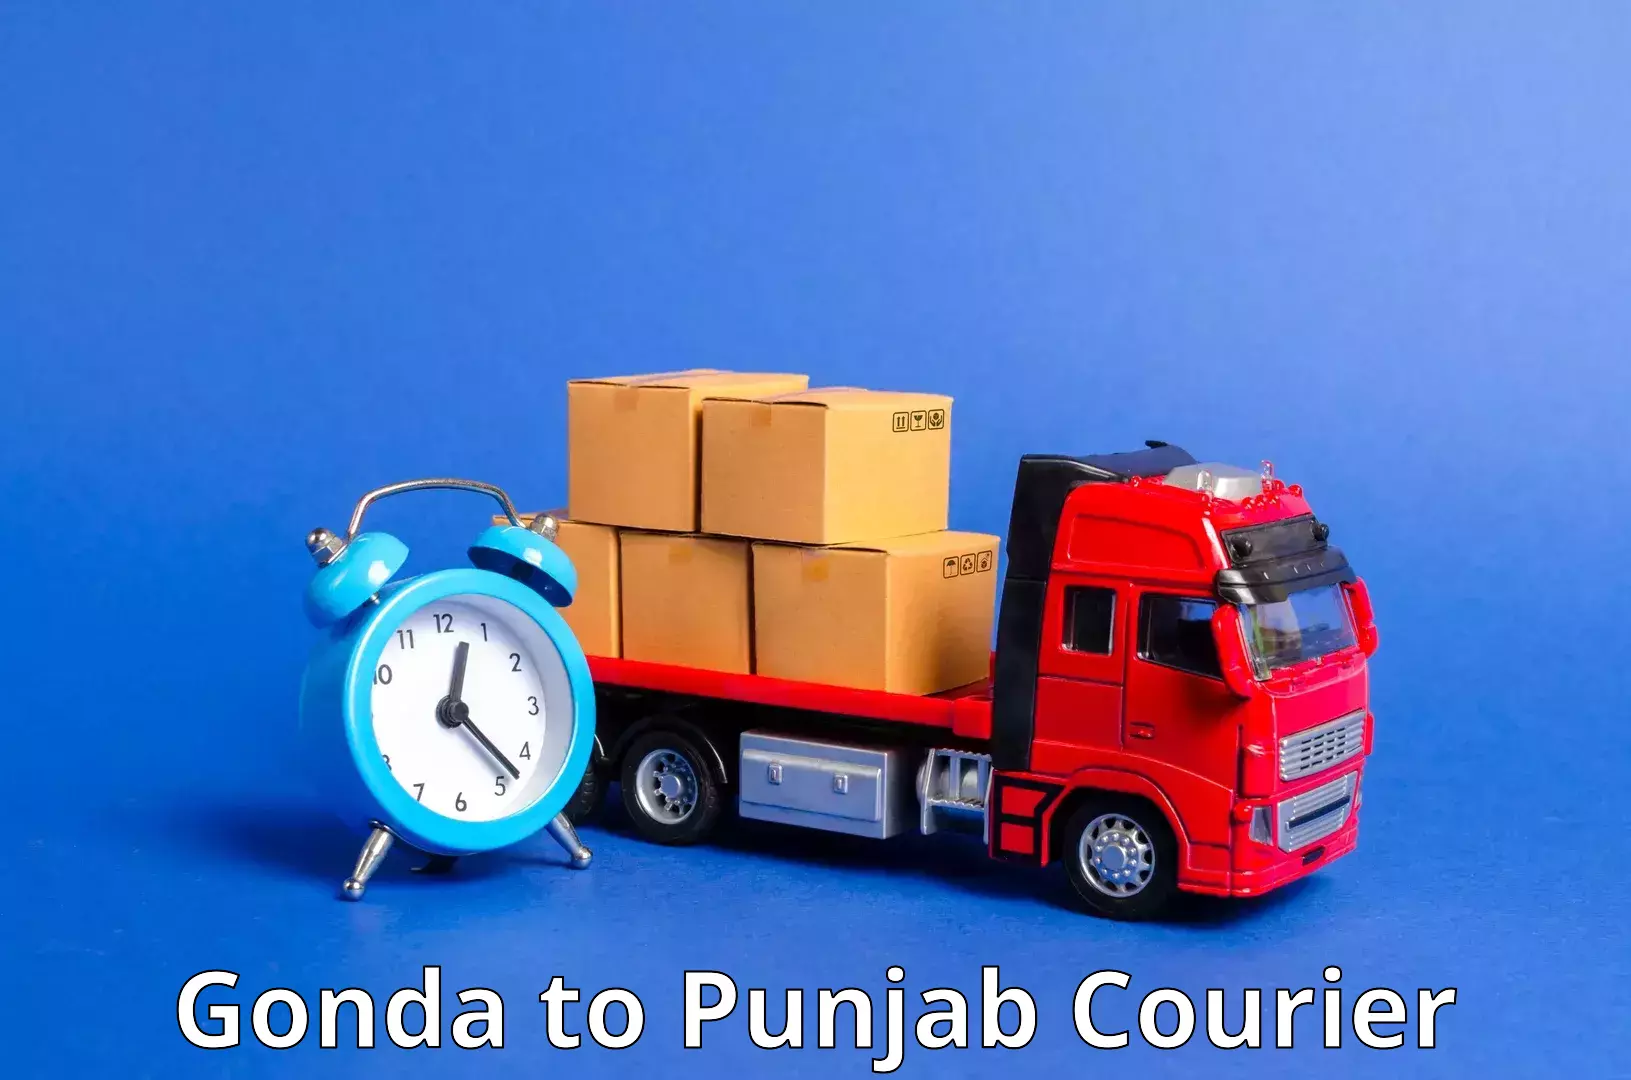 Diverse delivery methods in Gonda to Pathankot